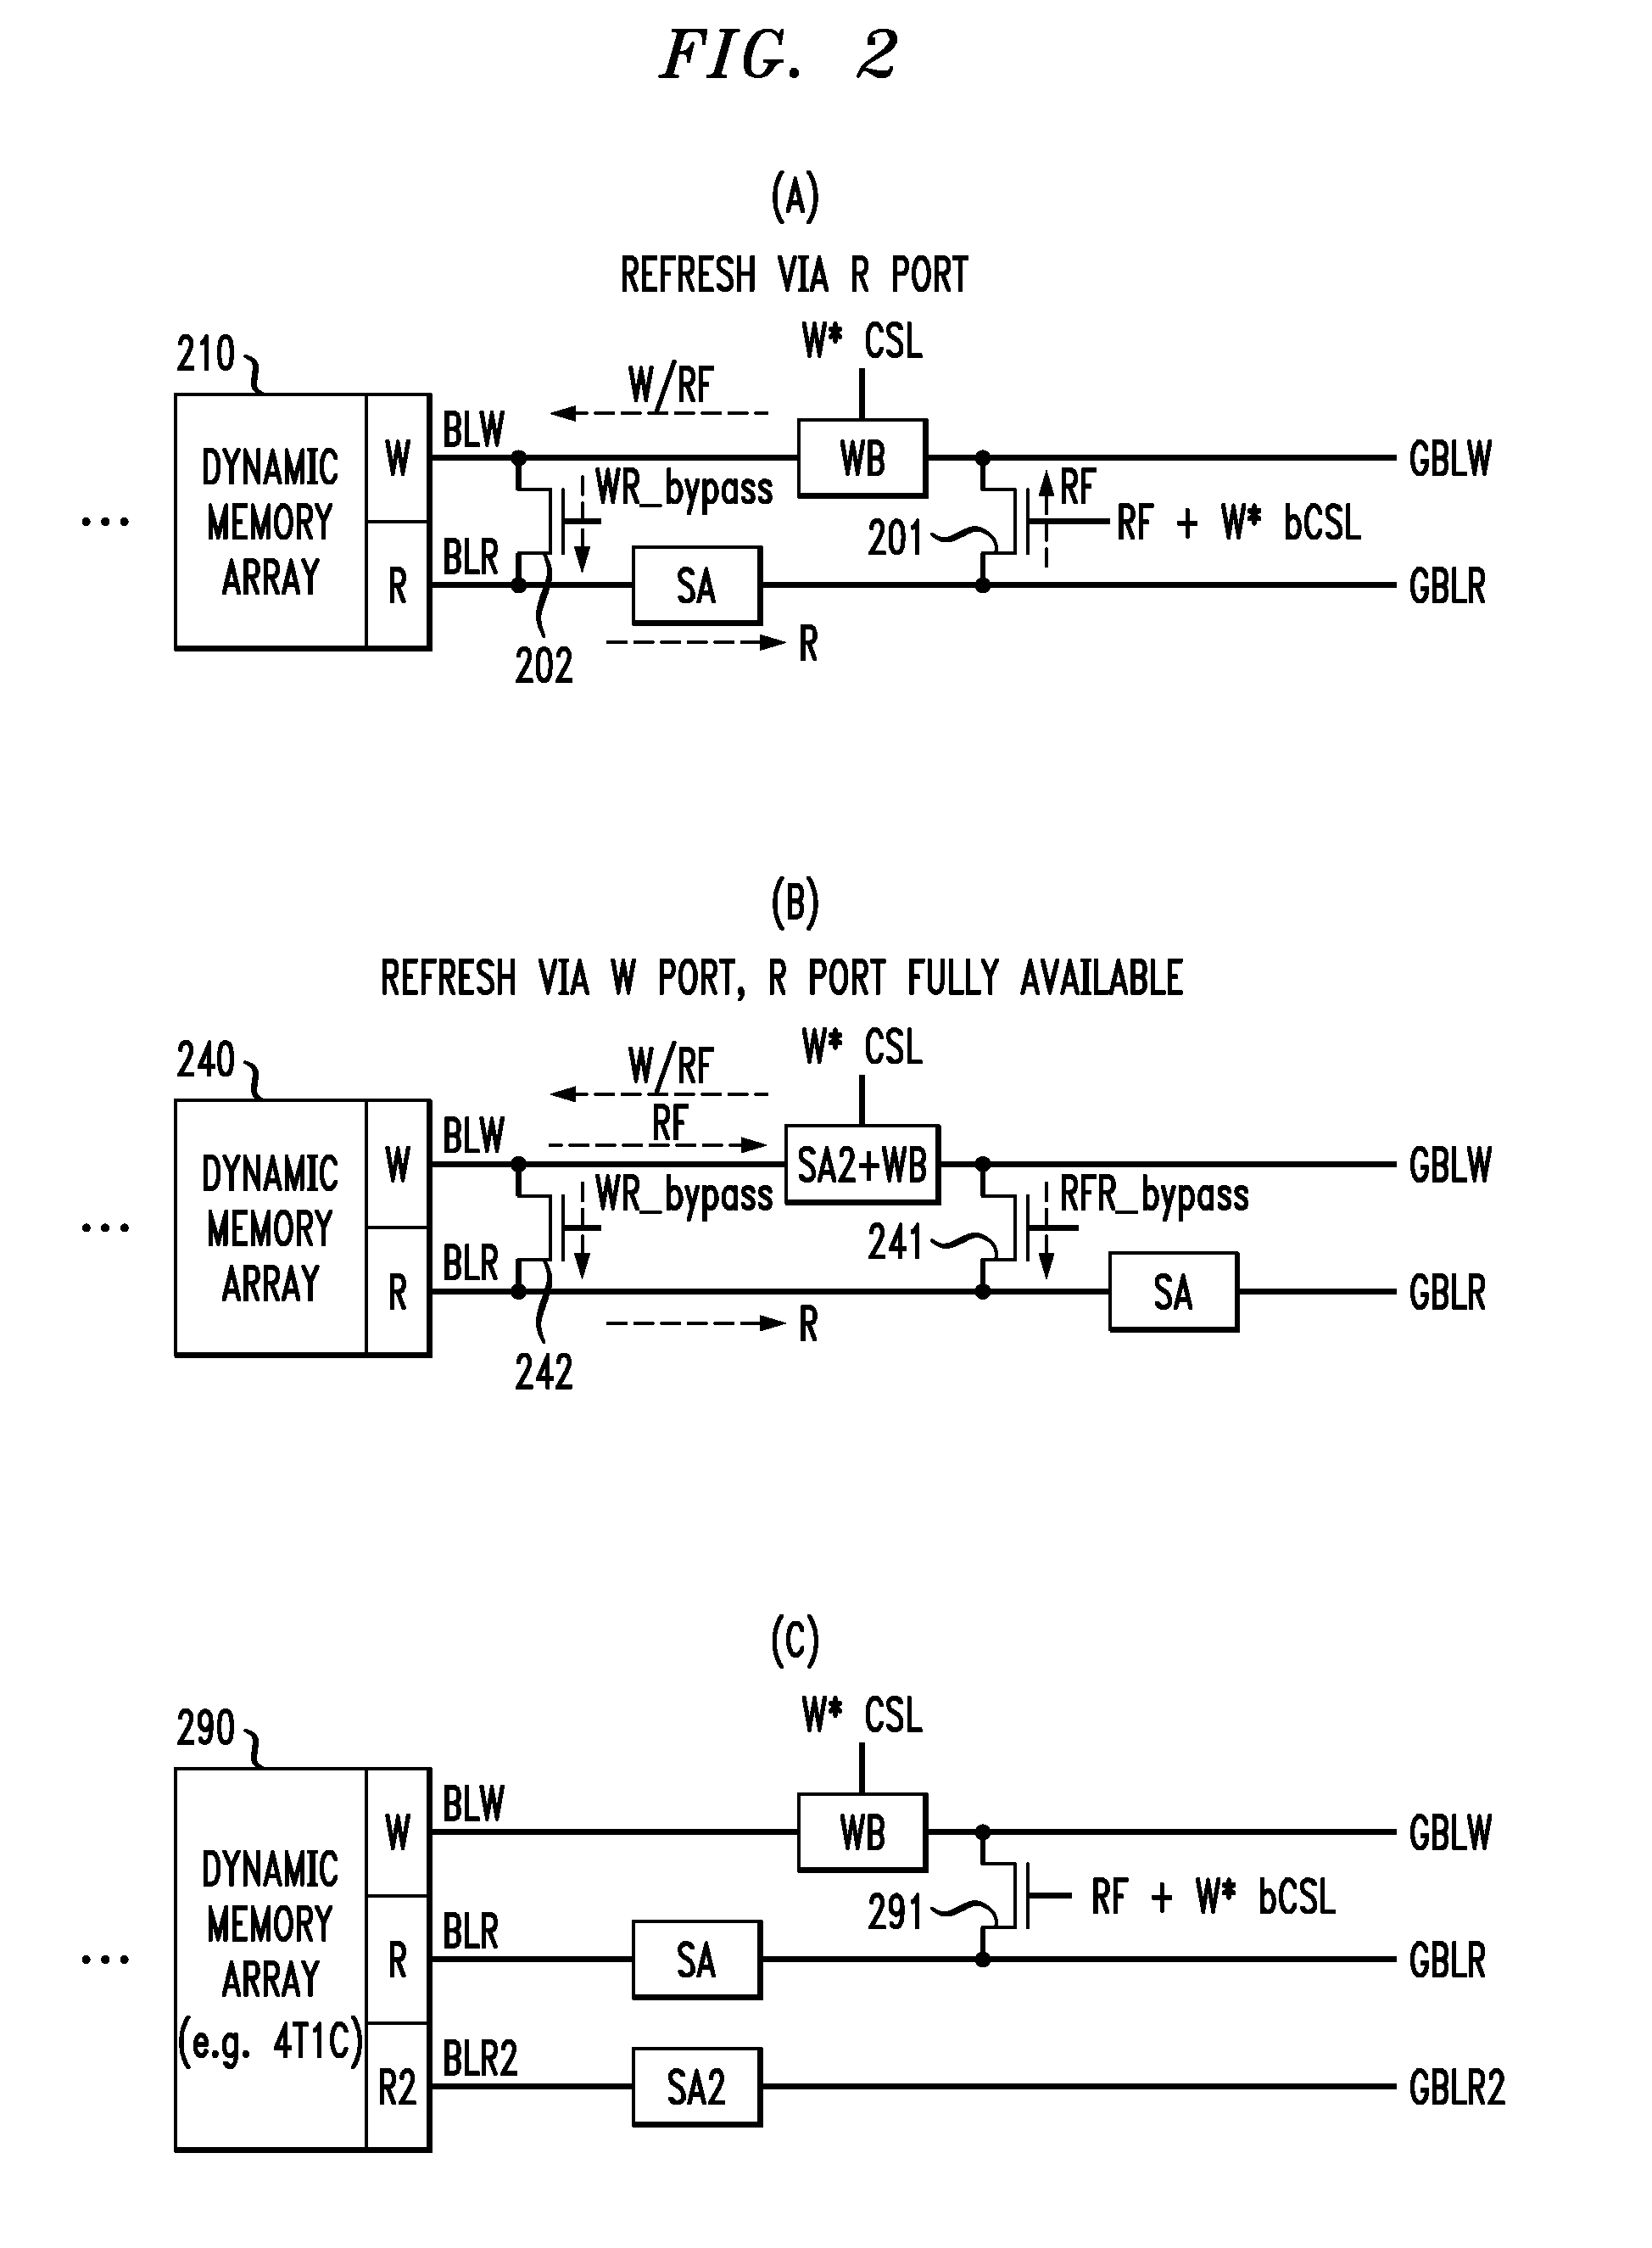 Multi-port dynamic memory structures